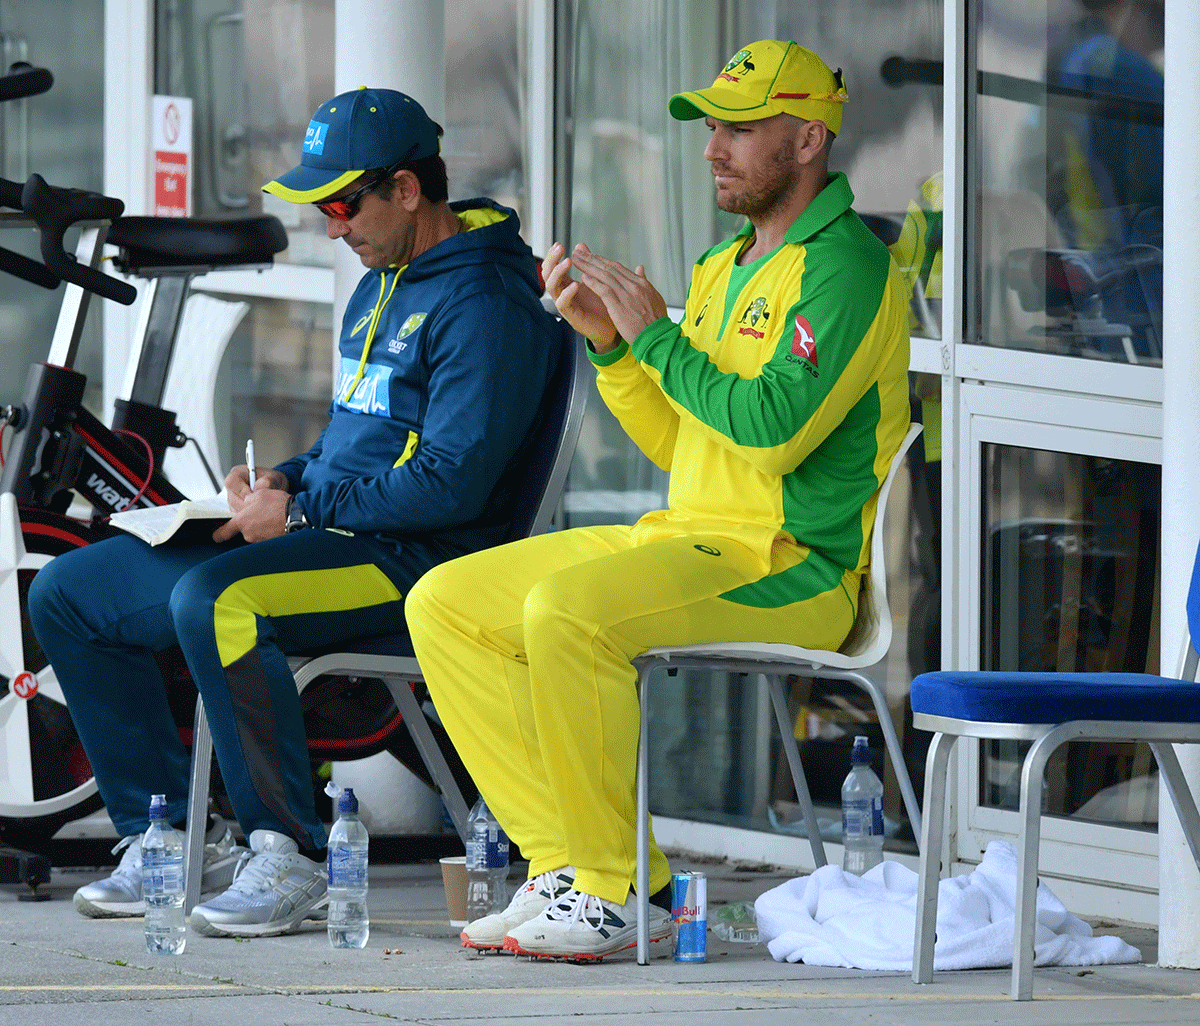 Aaron Finch and Justin Langer combined to guide Australia to the T20 World Cup title in the UAE last year, with the opener saying that Langer had helped create a good atmosphere in the squad.